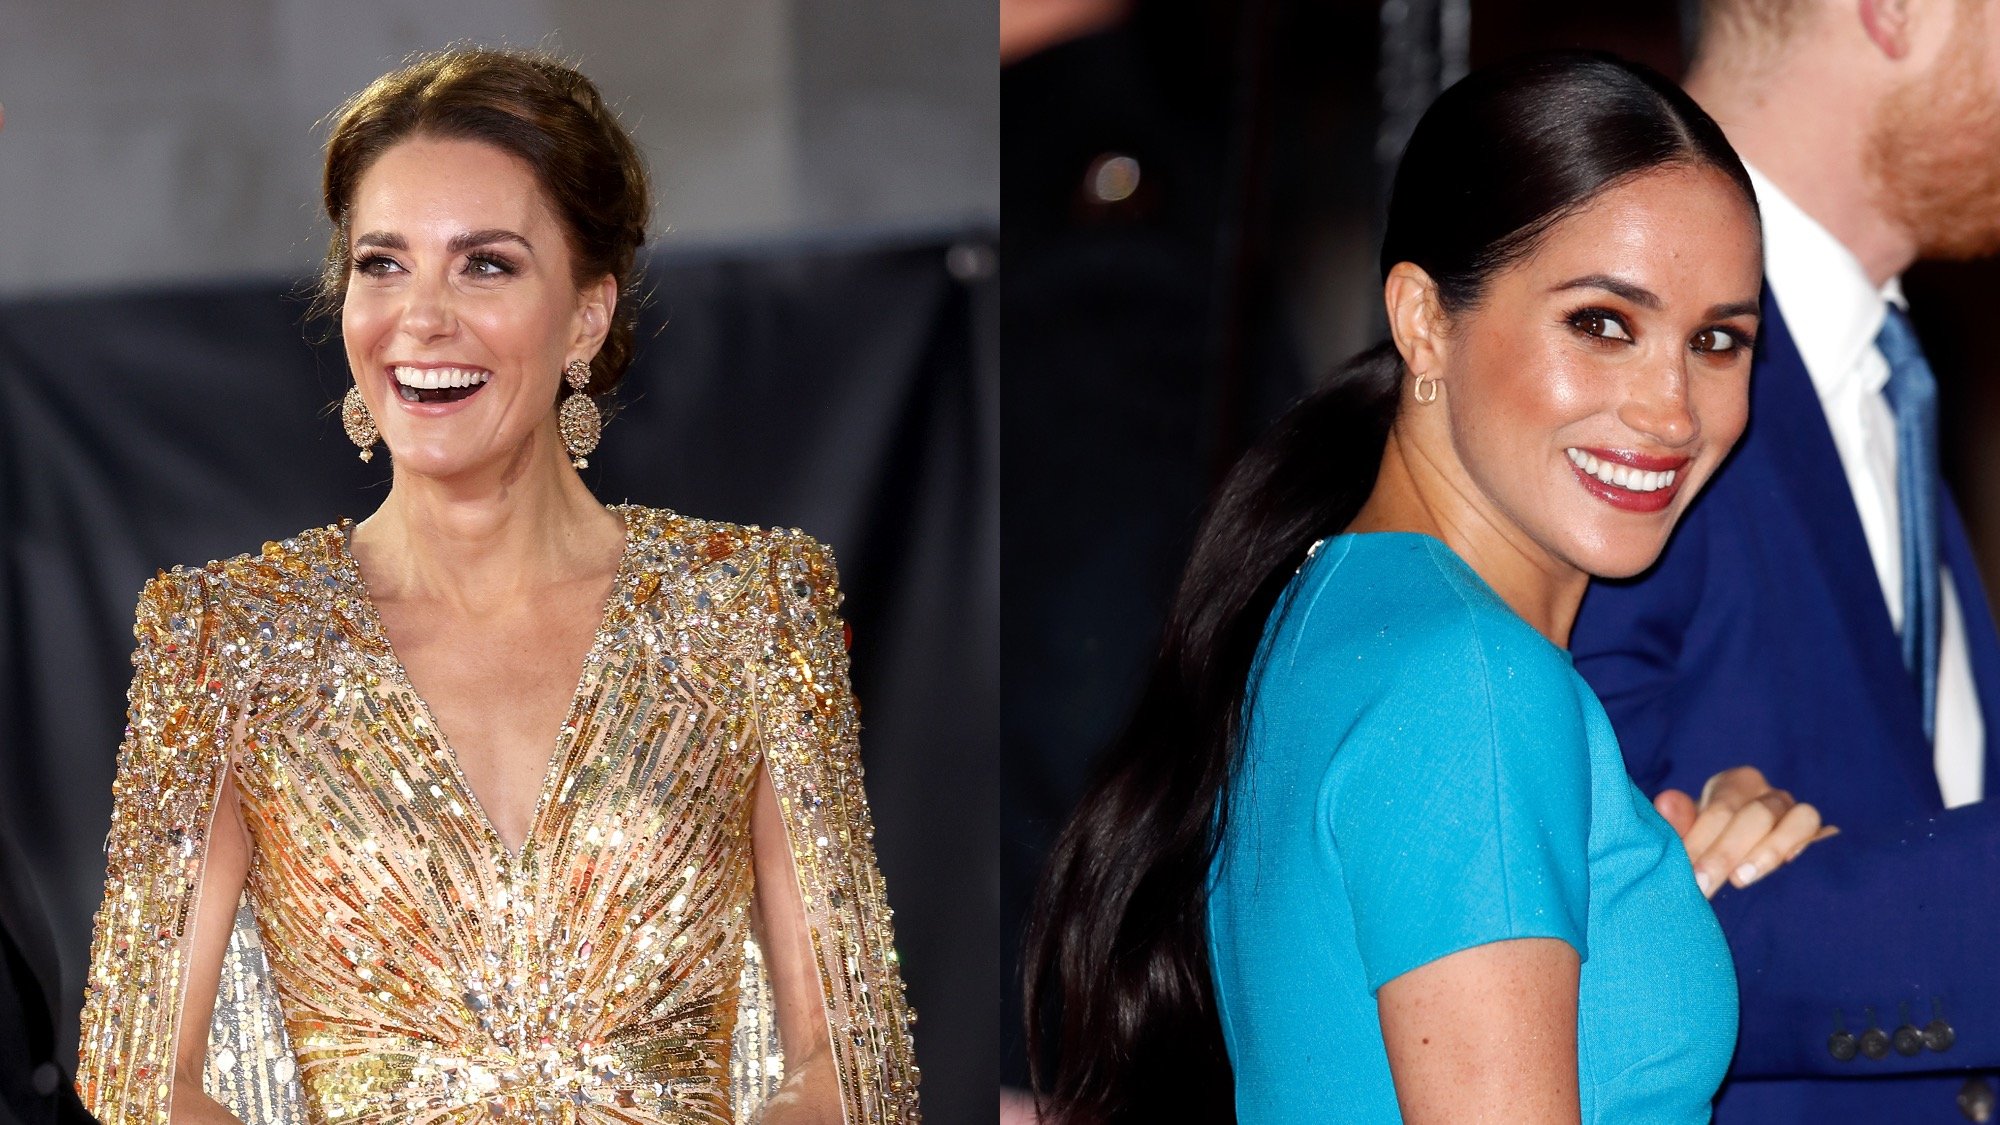 (L) Kate Middleton attends the "No Time To Die" World Premiere at Royal Albert Hall on September 28, 2021, in London, England. (R) Meghan Markle attends The Endeavour Fund Awards at Mansion House on March 5, 2020 in London, England. A body language expert noticed a 'virtual generational difference in their relationships with the camera.'